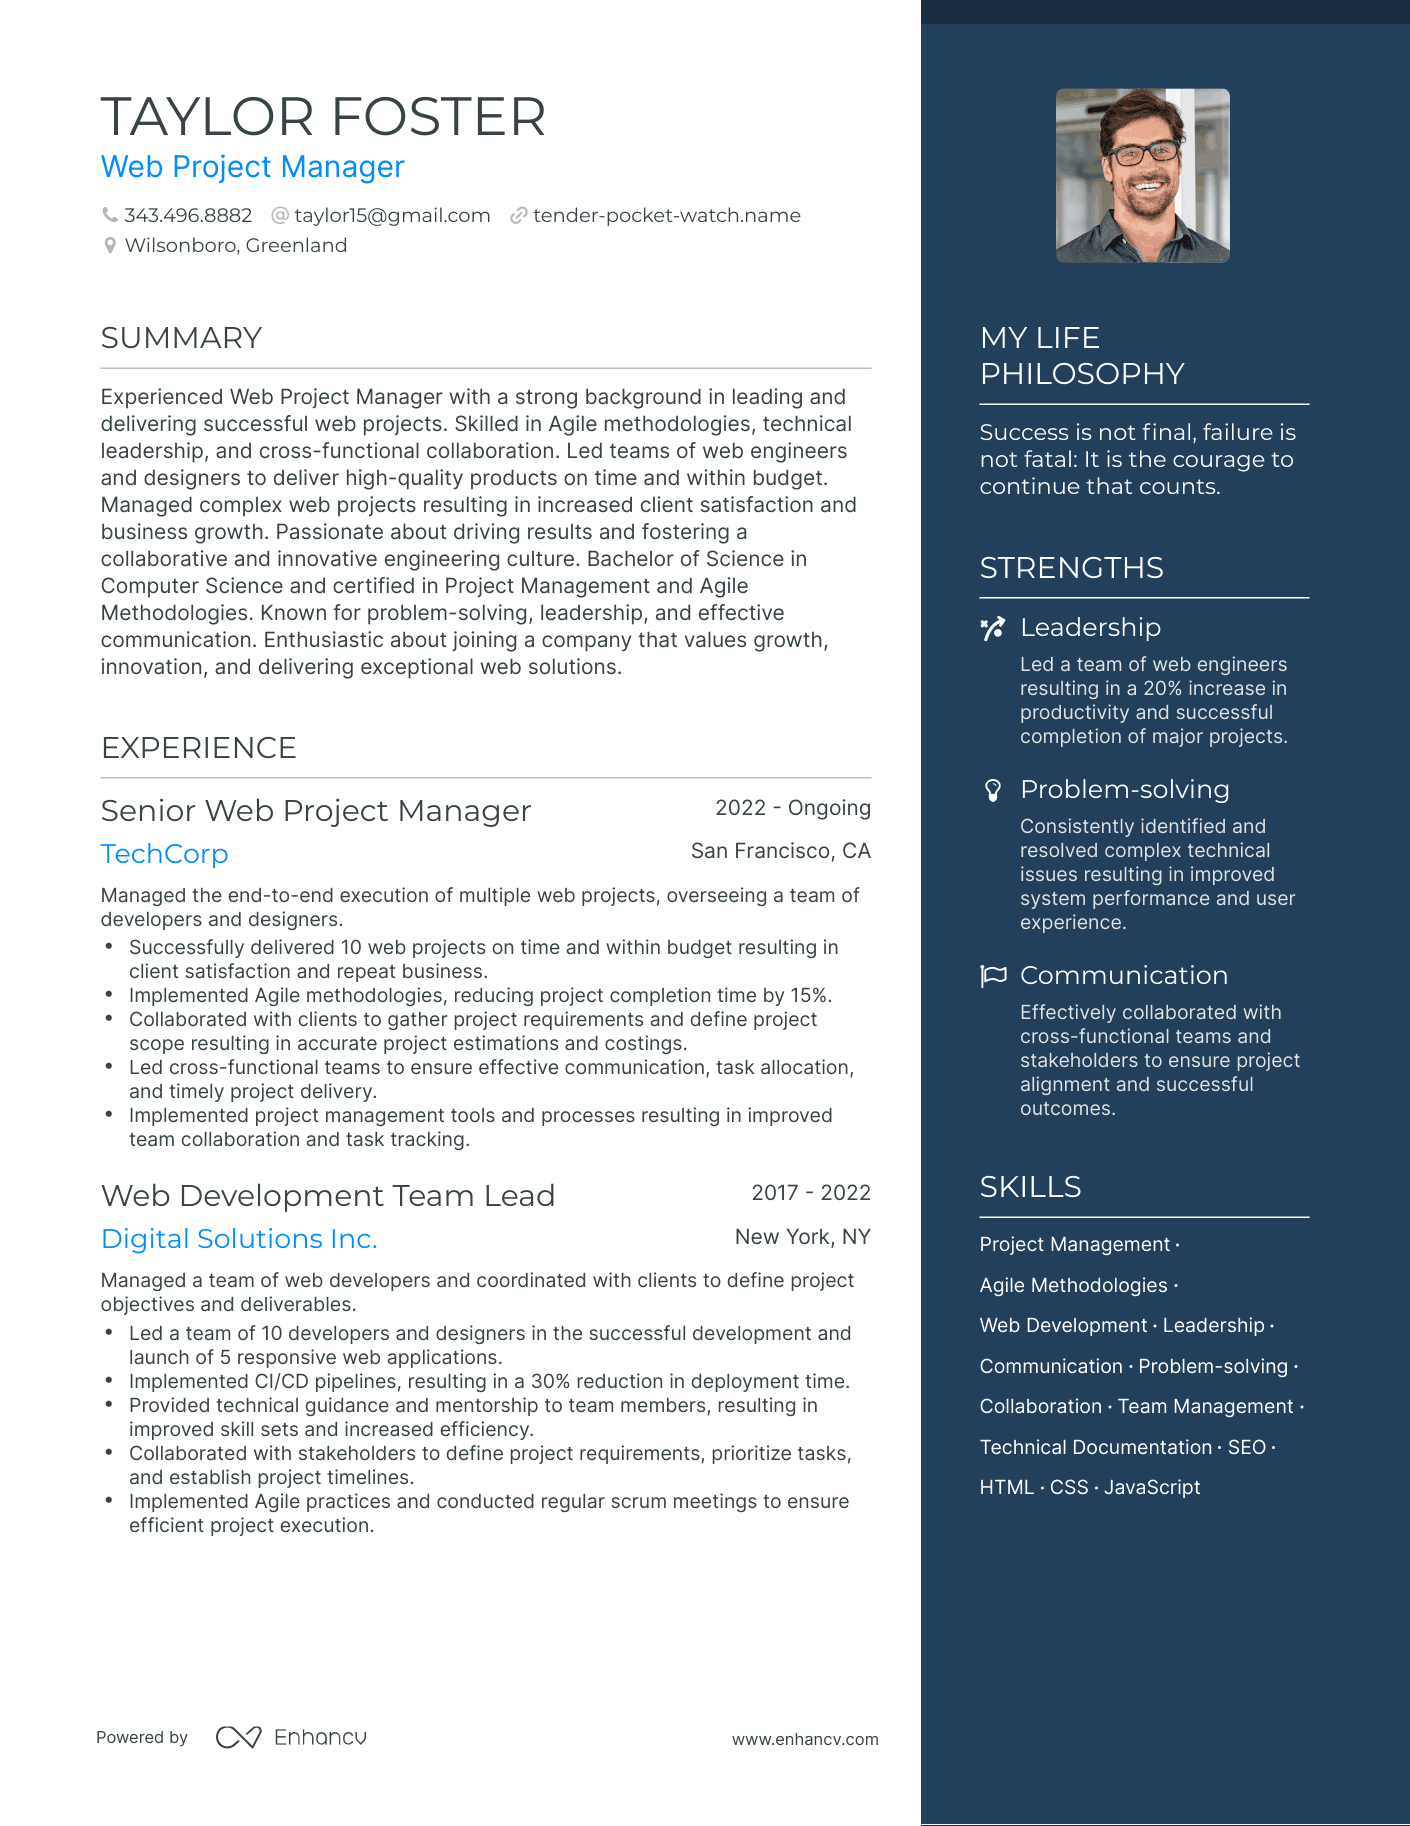 Web Project Manager resume example